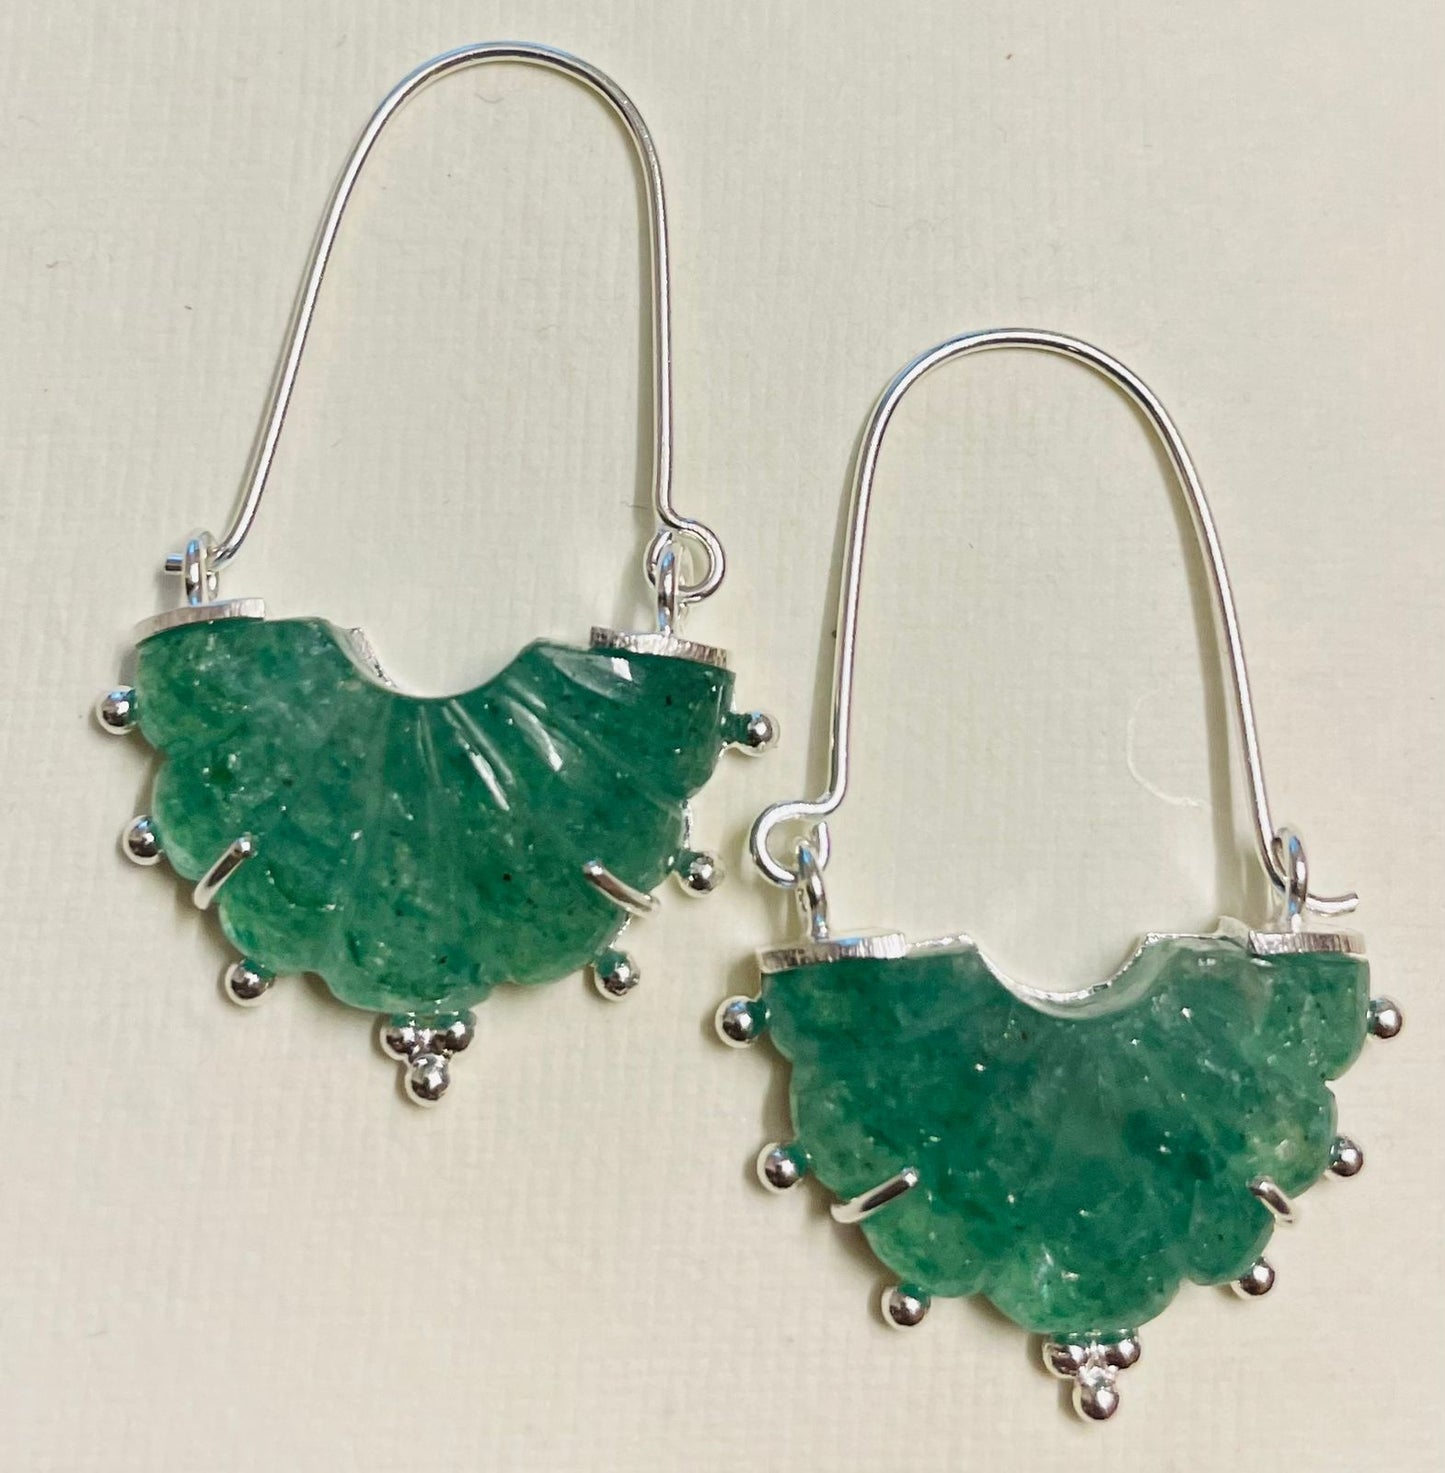 Grapes aventurine carved stone hoops, sterling silver.